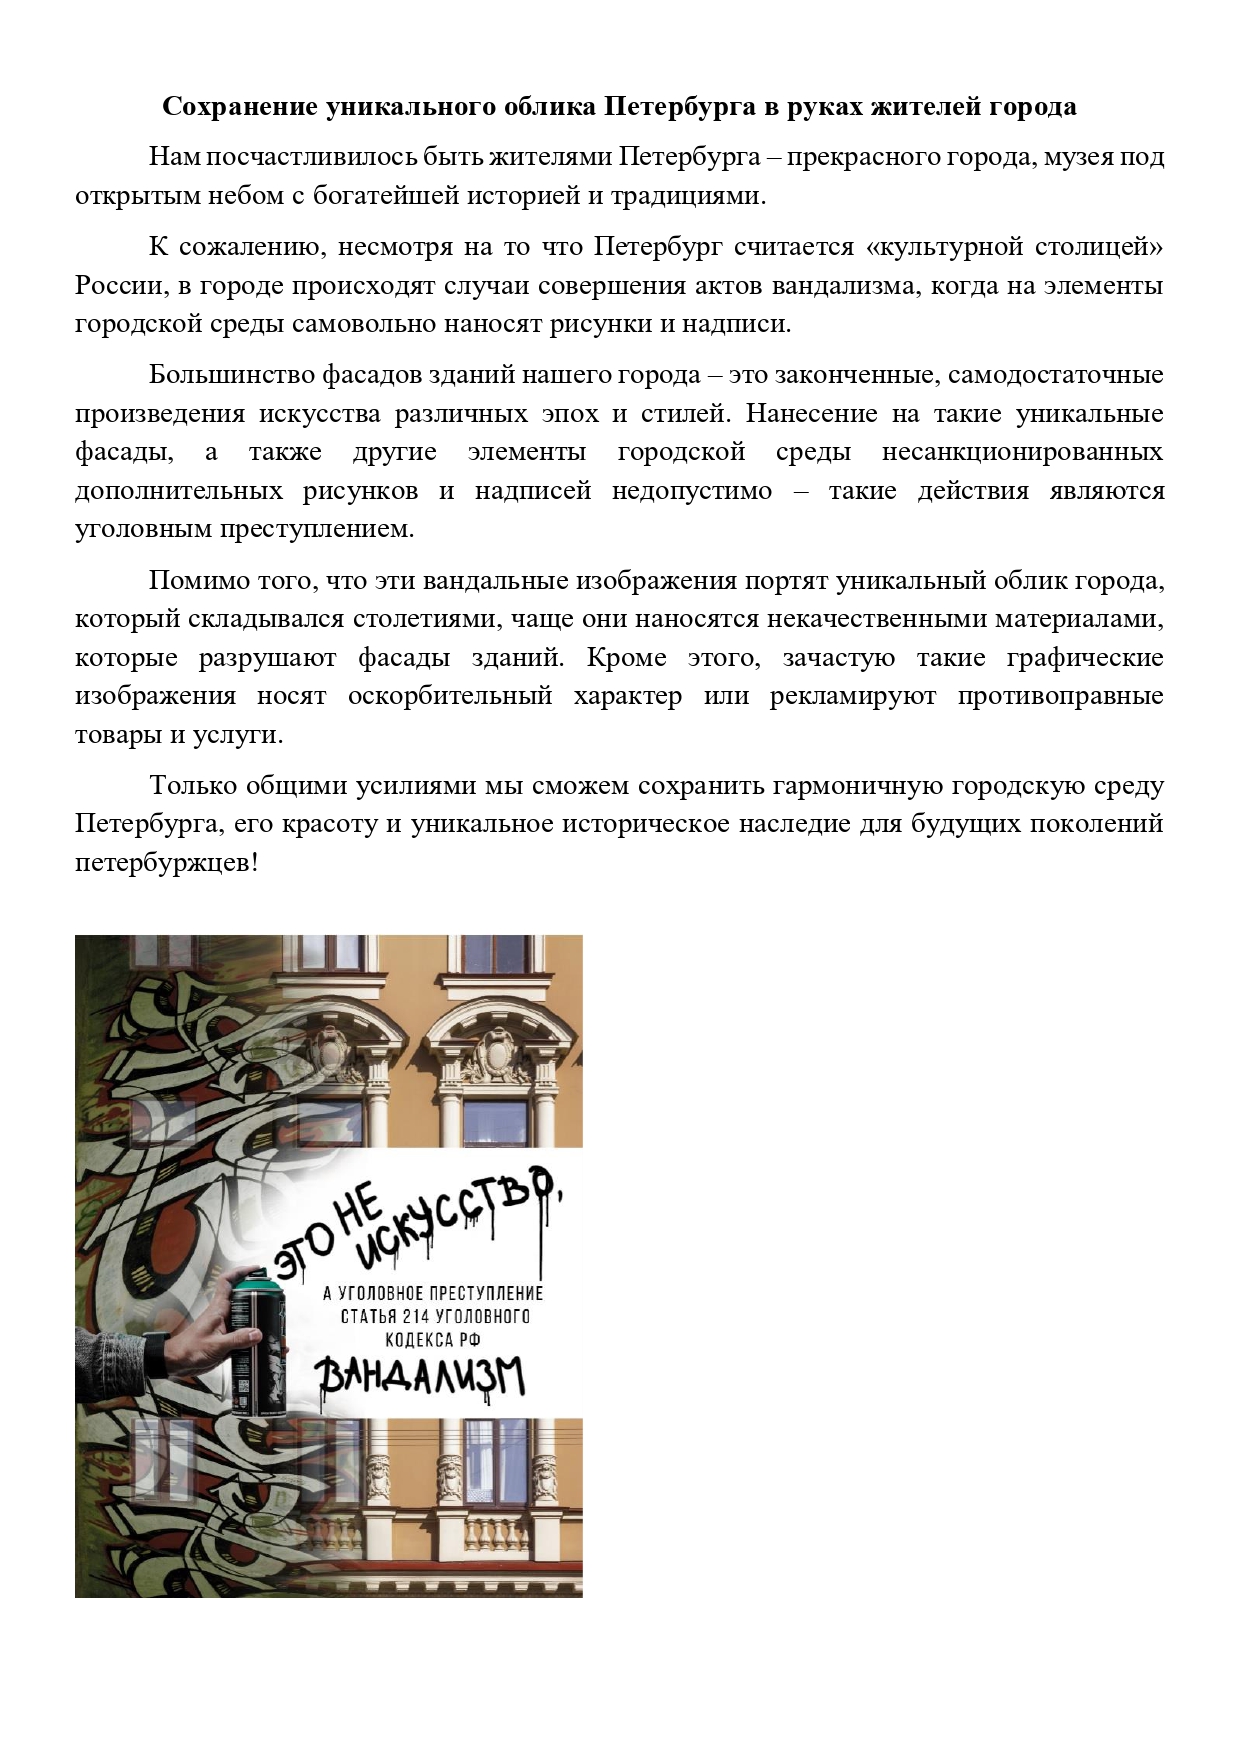 Фасад 1 page 0001